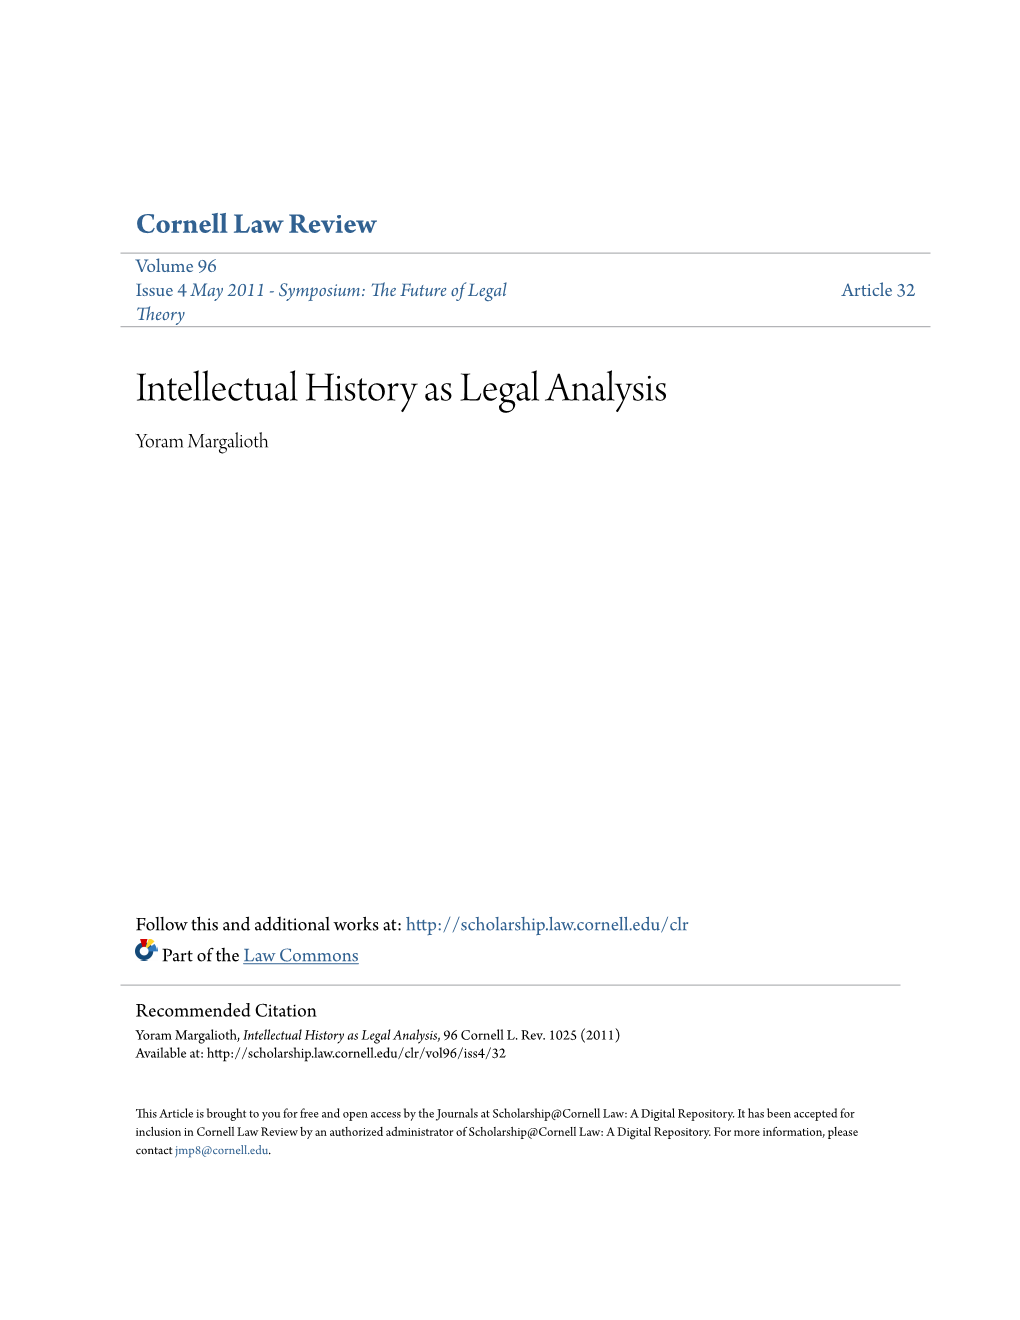 Intellectual History As Legal Analysis Yoram Margalioth